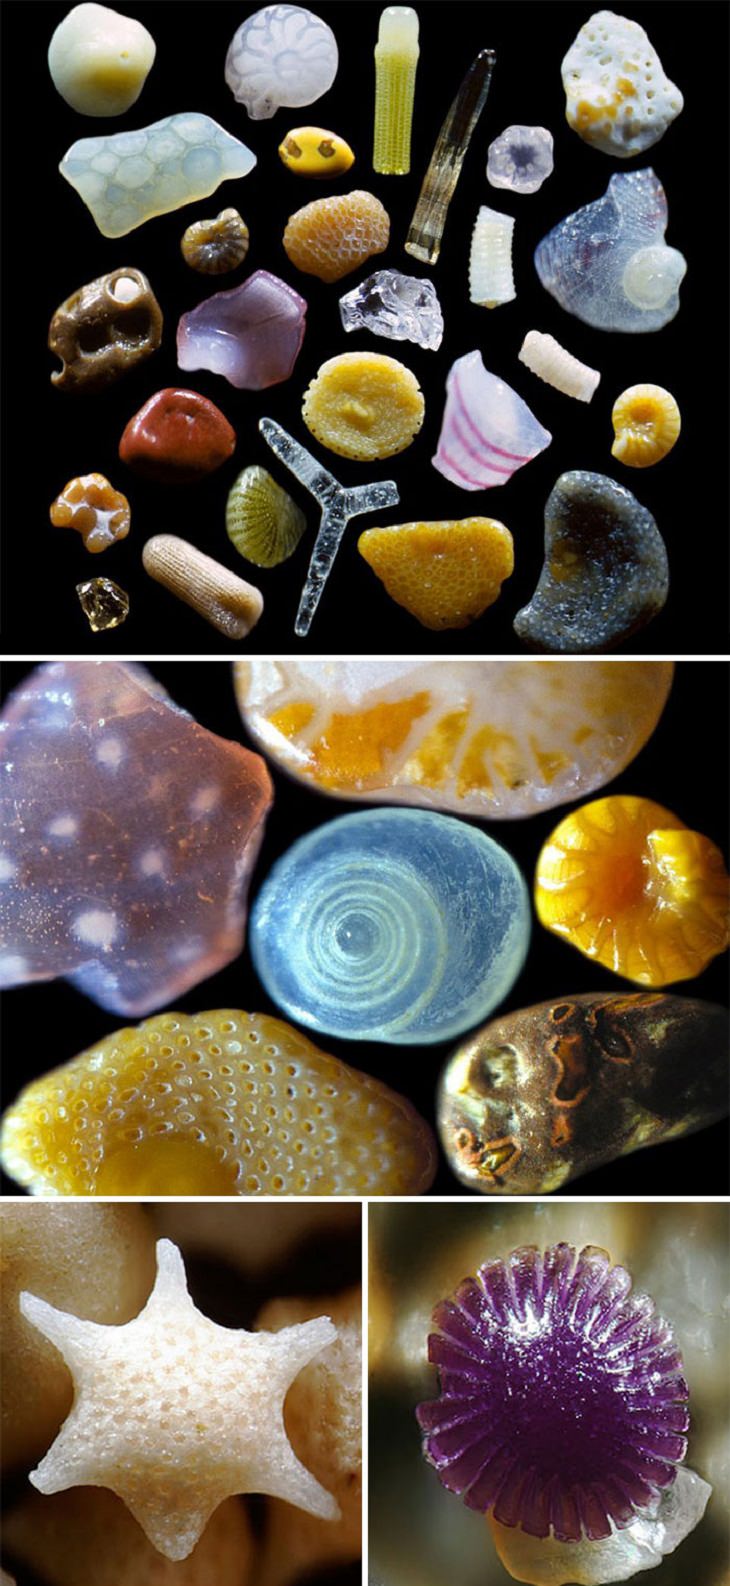 Rare Pictures grains of sand